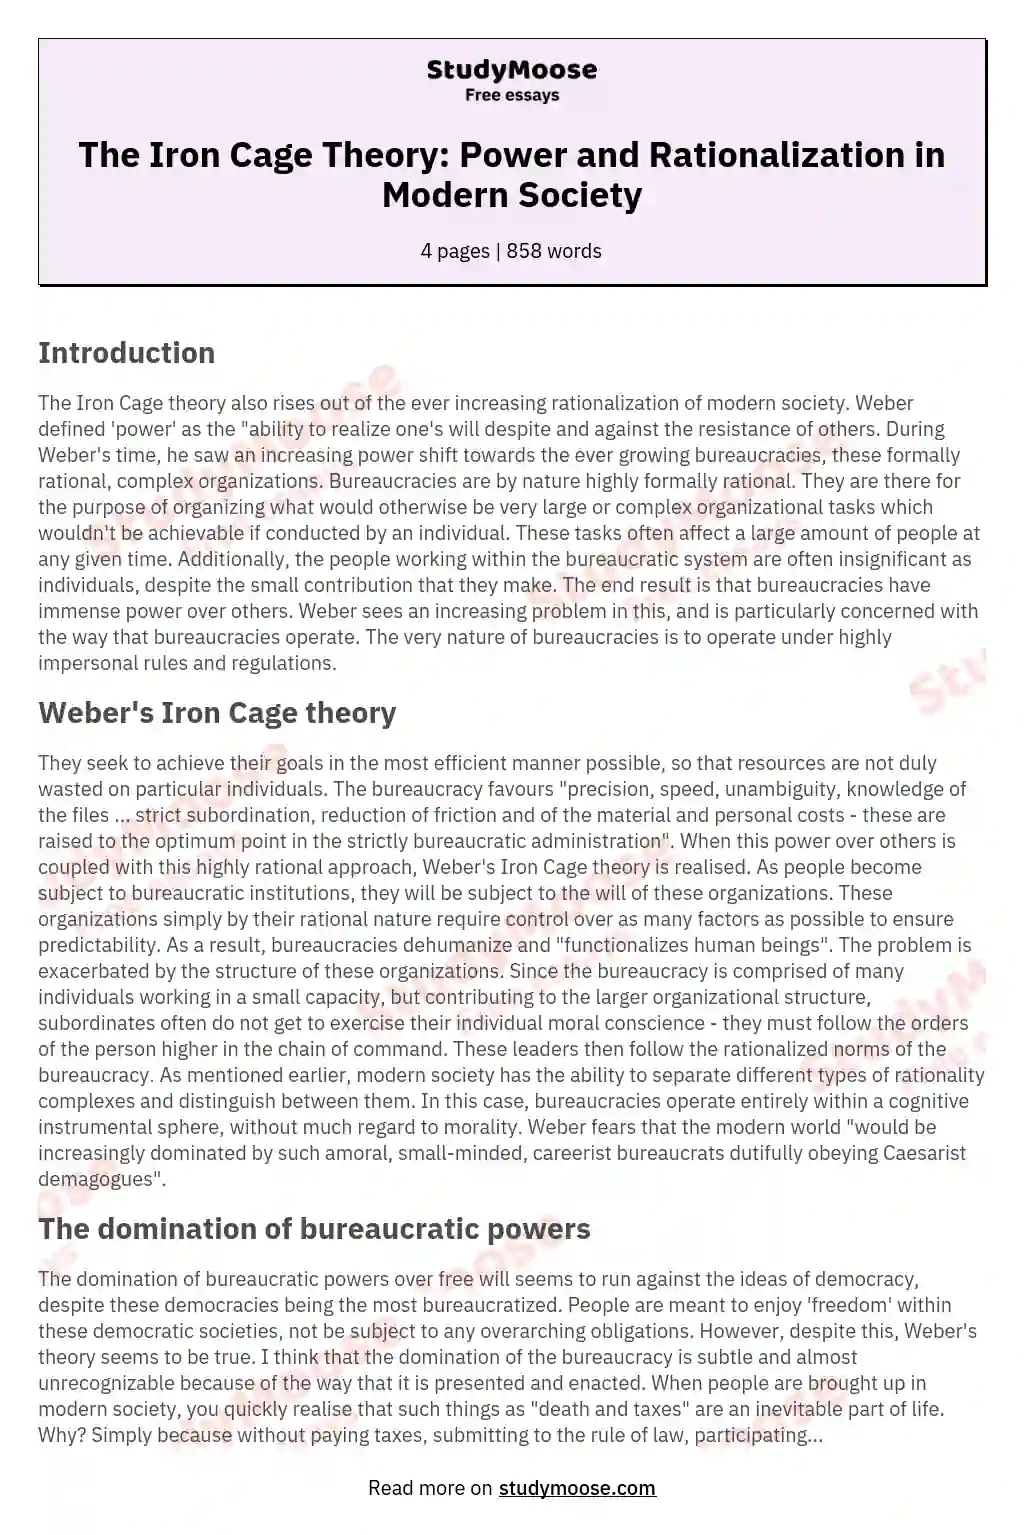 The Iron Cage Theory: Power and Rationalization in Modern Society essay